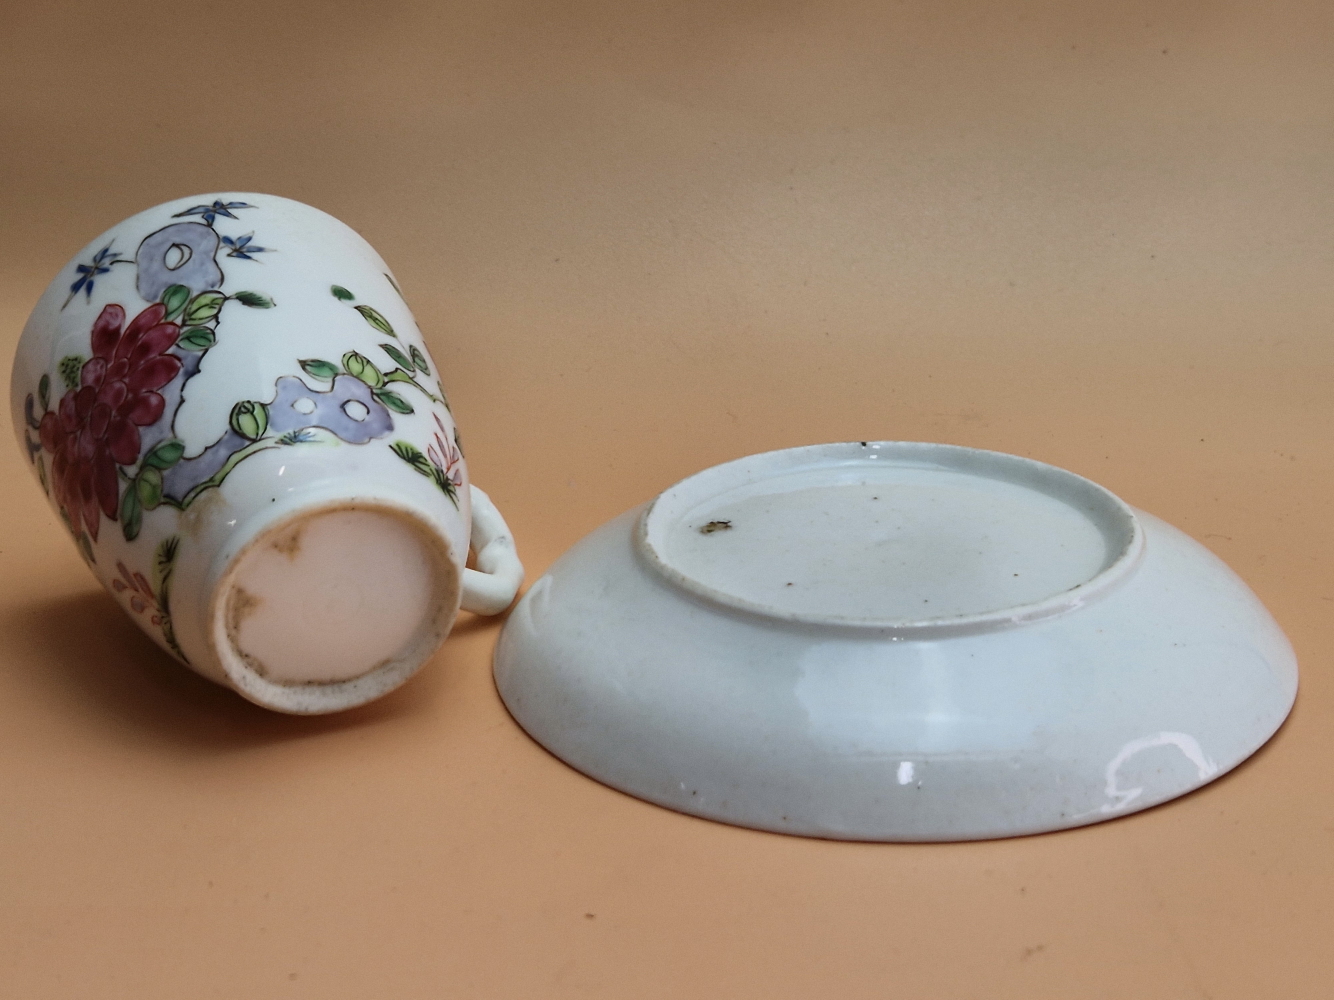 A BOW PORCELAIN COFFEE CUP AND SAUCER PAINTED WITH FLOWERS GROWING BY ROCKS - Image 6 of 6